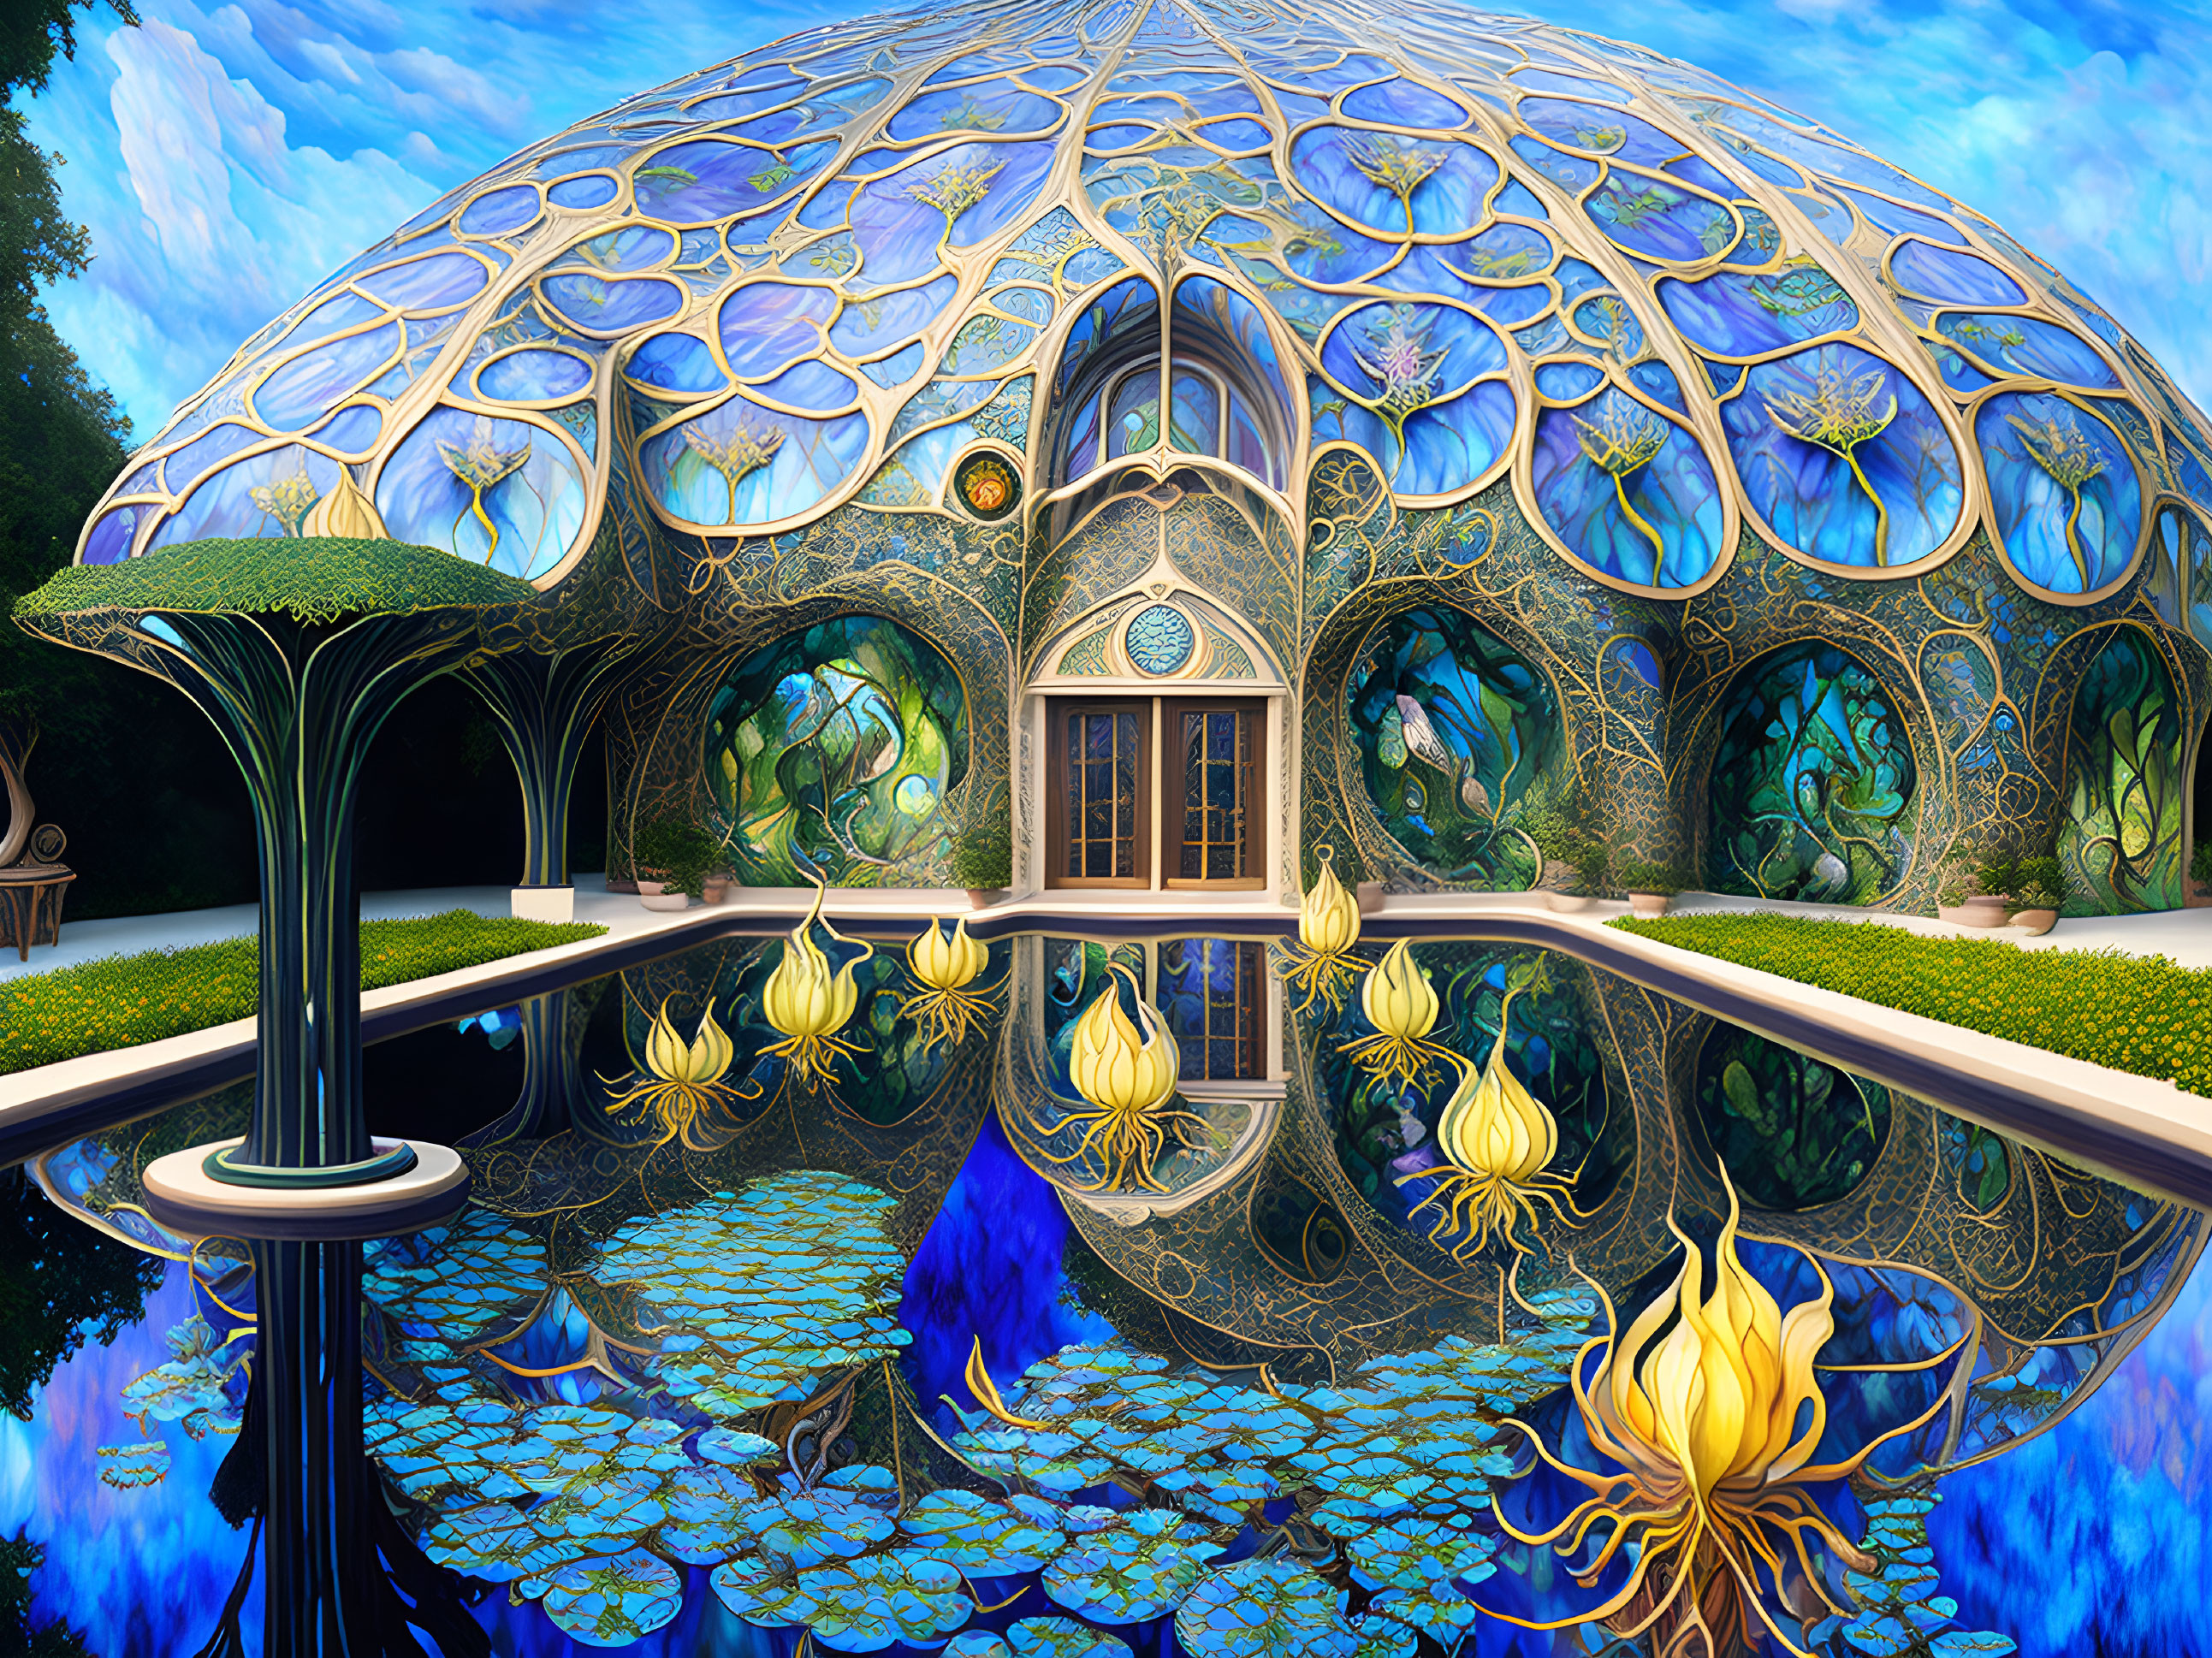 Fantasy illustration of ornate glass dome with lotuses and figure